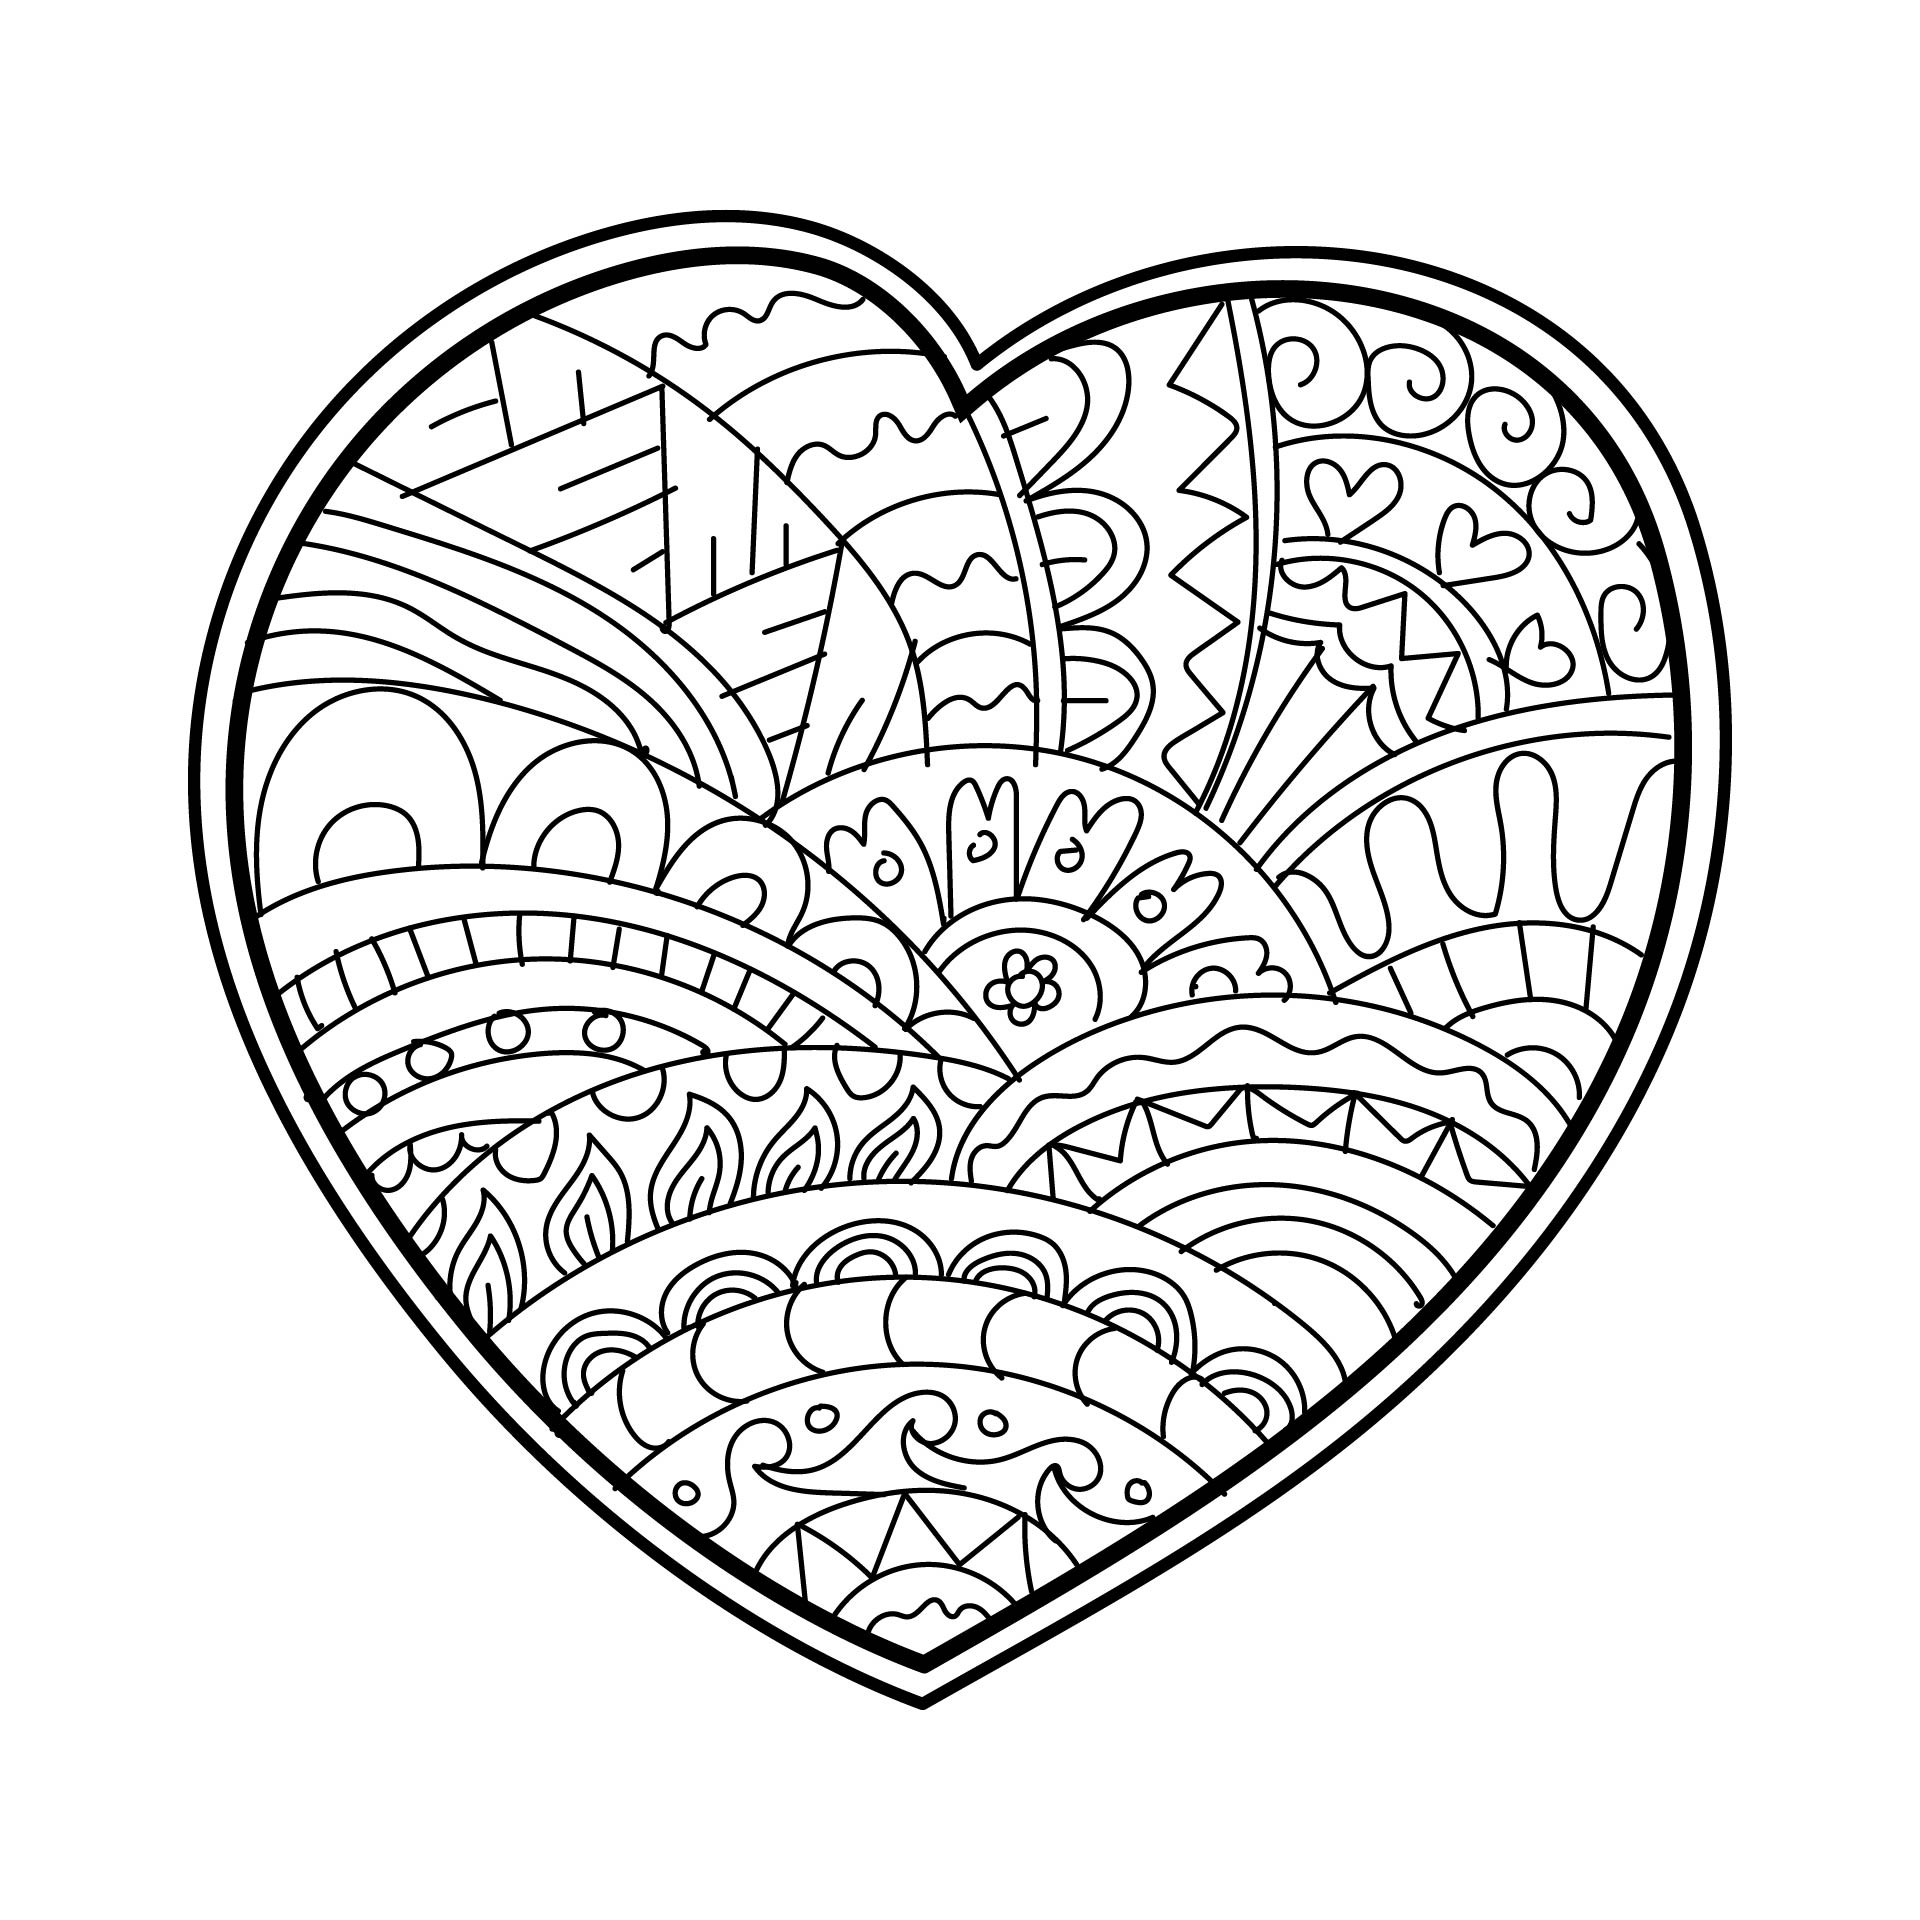 8 Best Images of Printable Coloring Pages Doodle Art - Printable Doodle